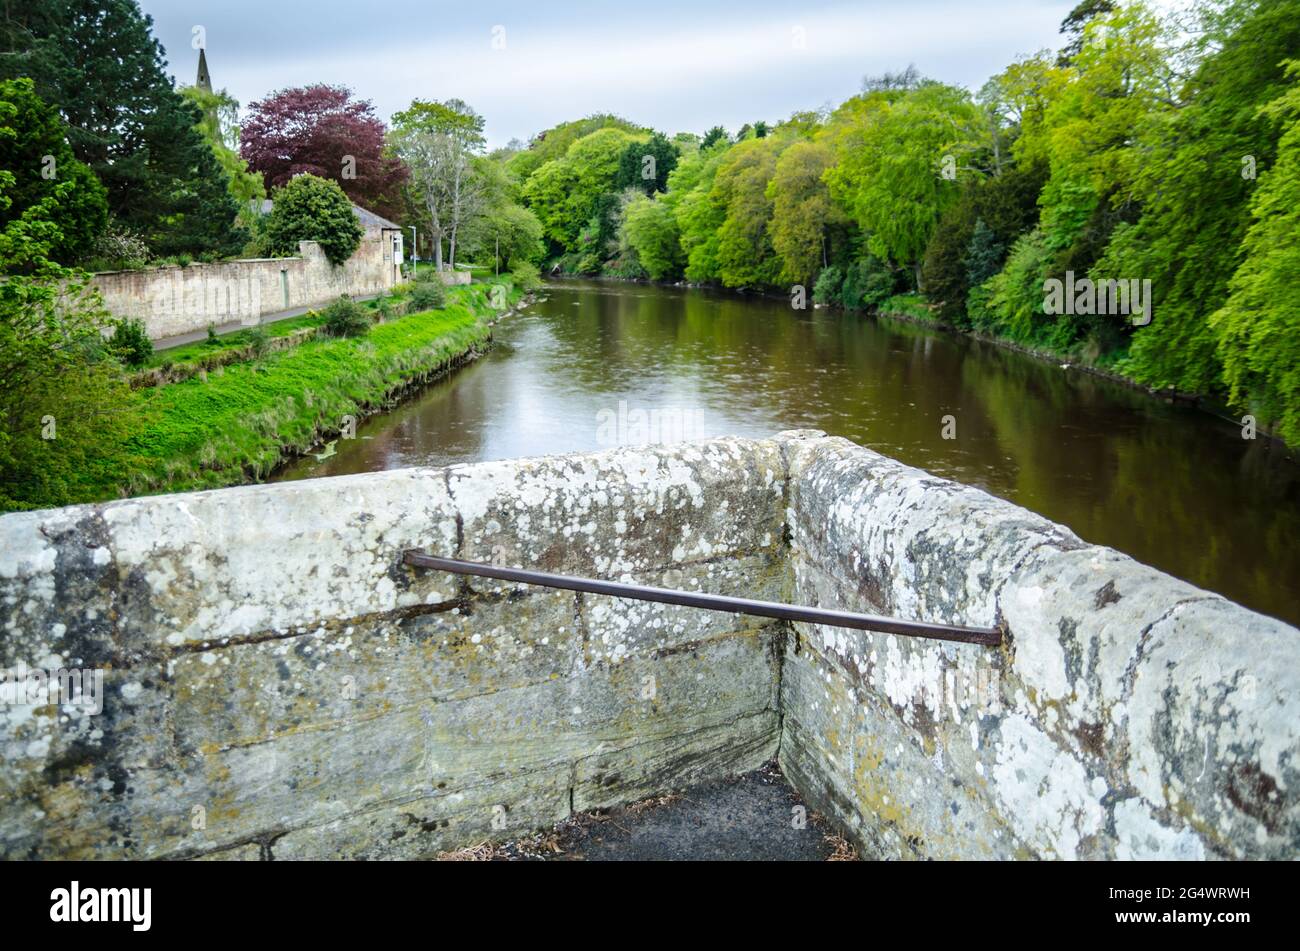 Westerly View of the River Coquet at Warkworth, Northumberland, Viewed from the Support Section of Warkworth Bridge Stock Photo